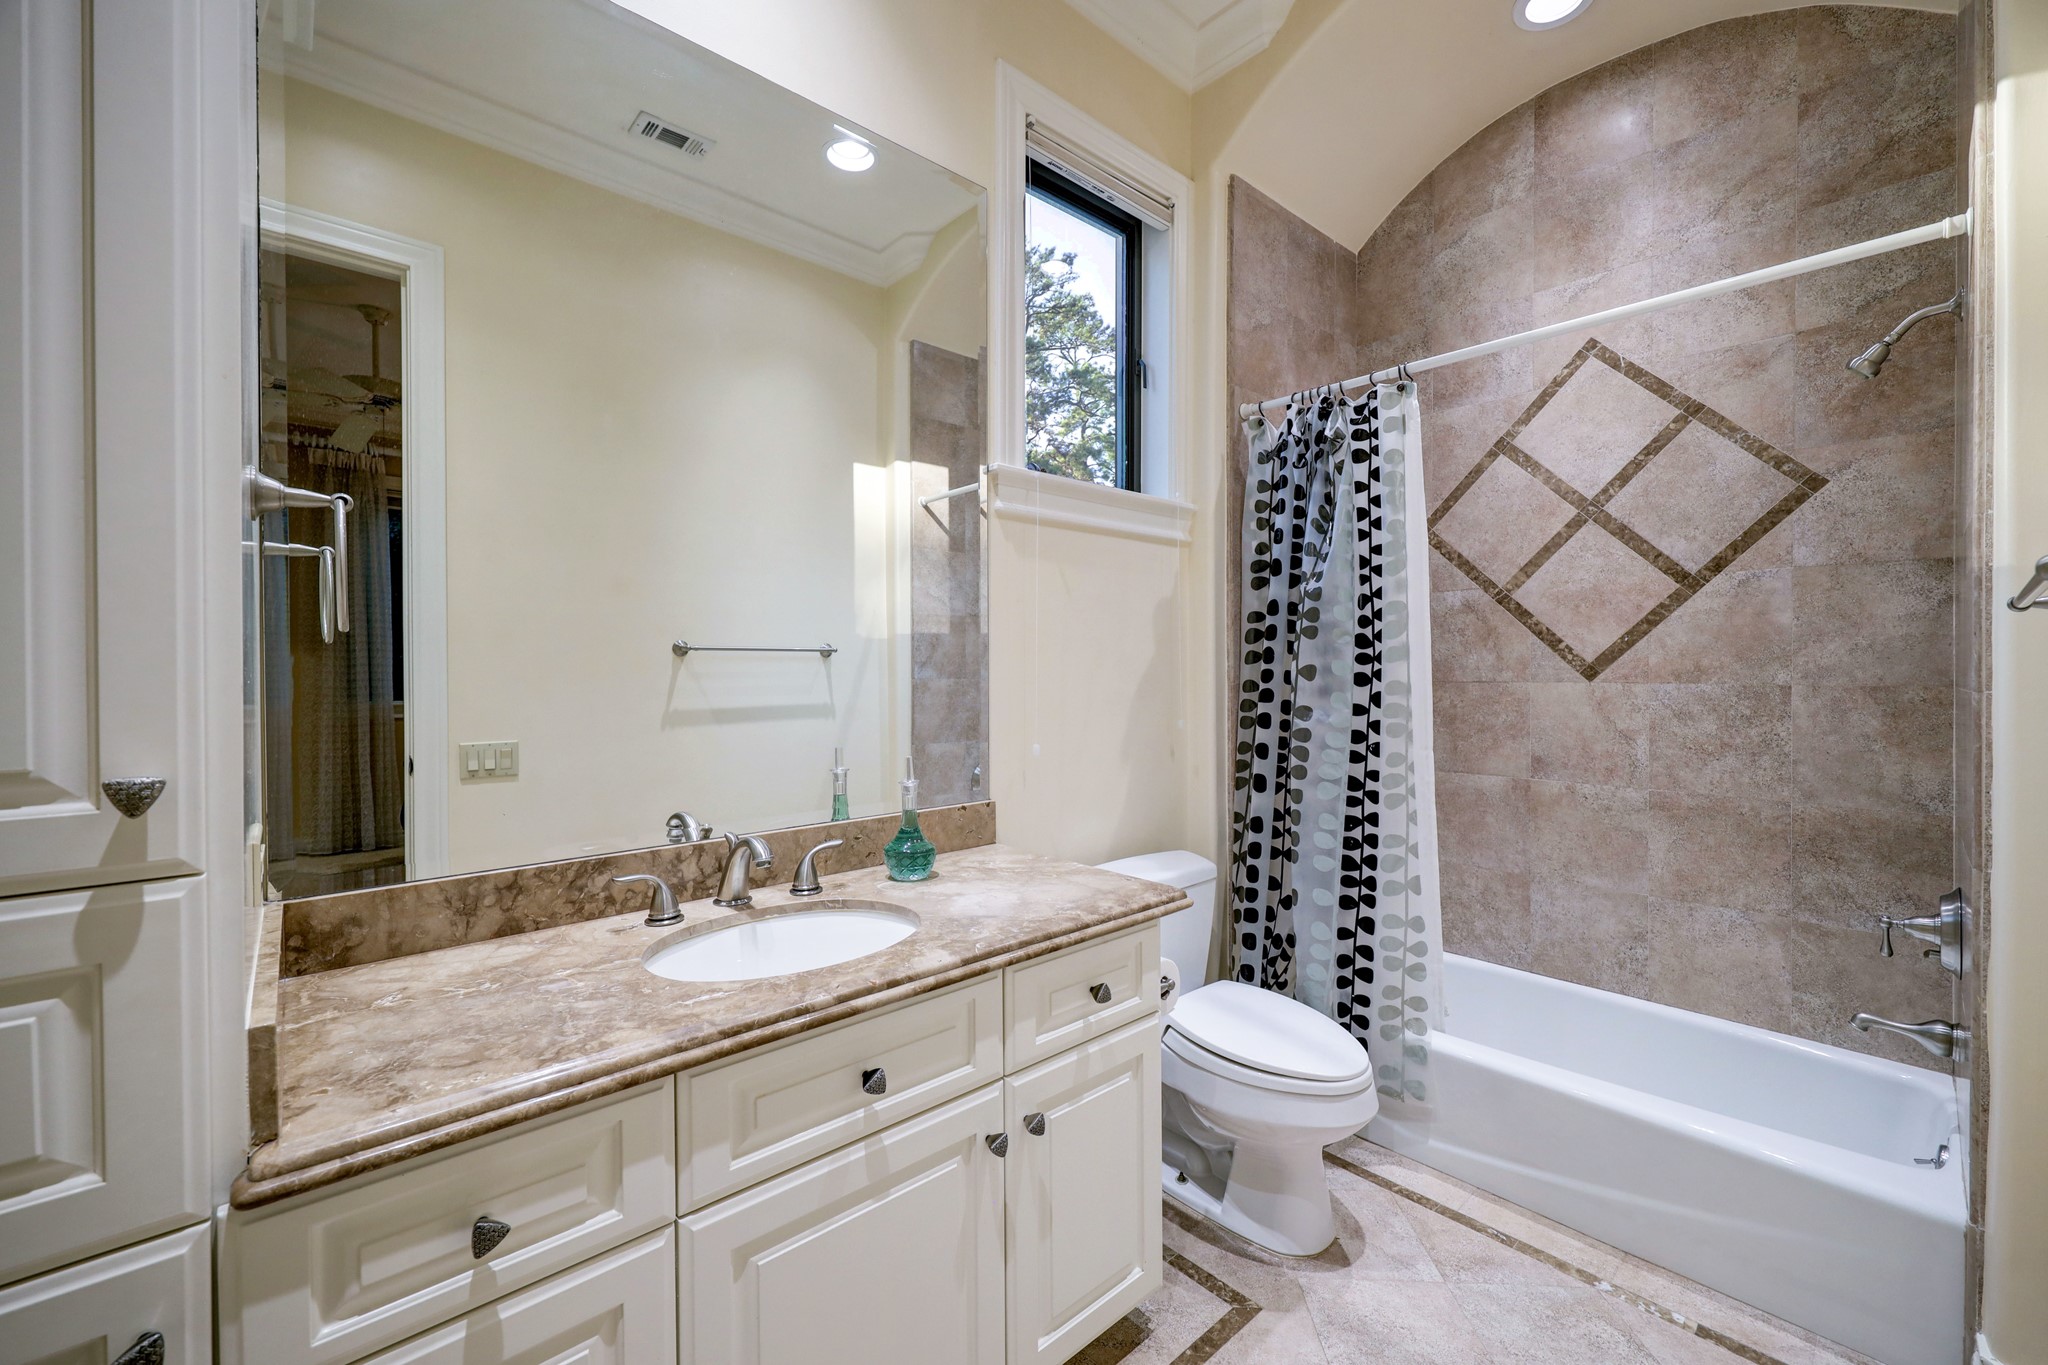 This Secondary Bathroom [11 x 5] features tile floors, marble countertop and backsplash, built-in linen storage and laundry hamper, and tub/shower combo with tile surround.